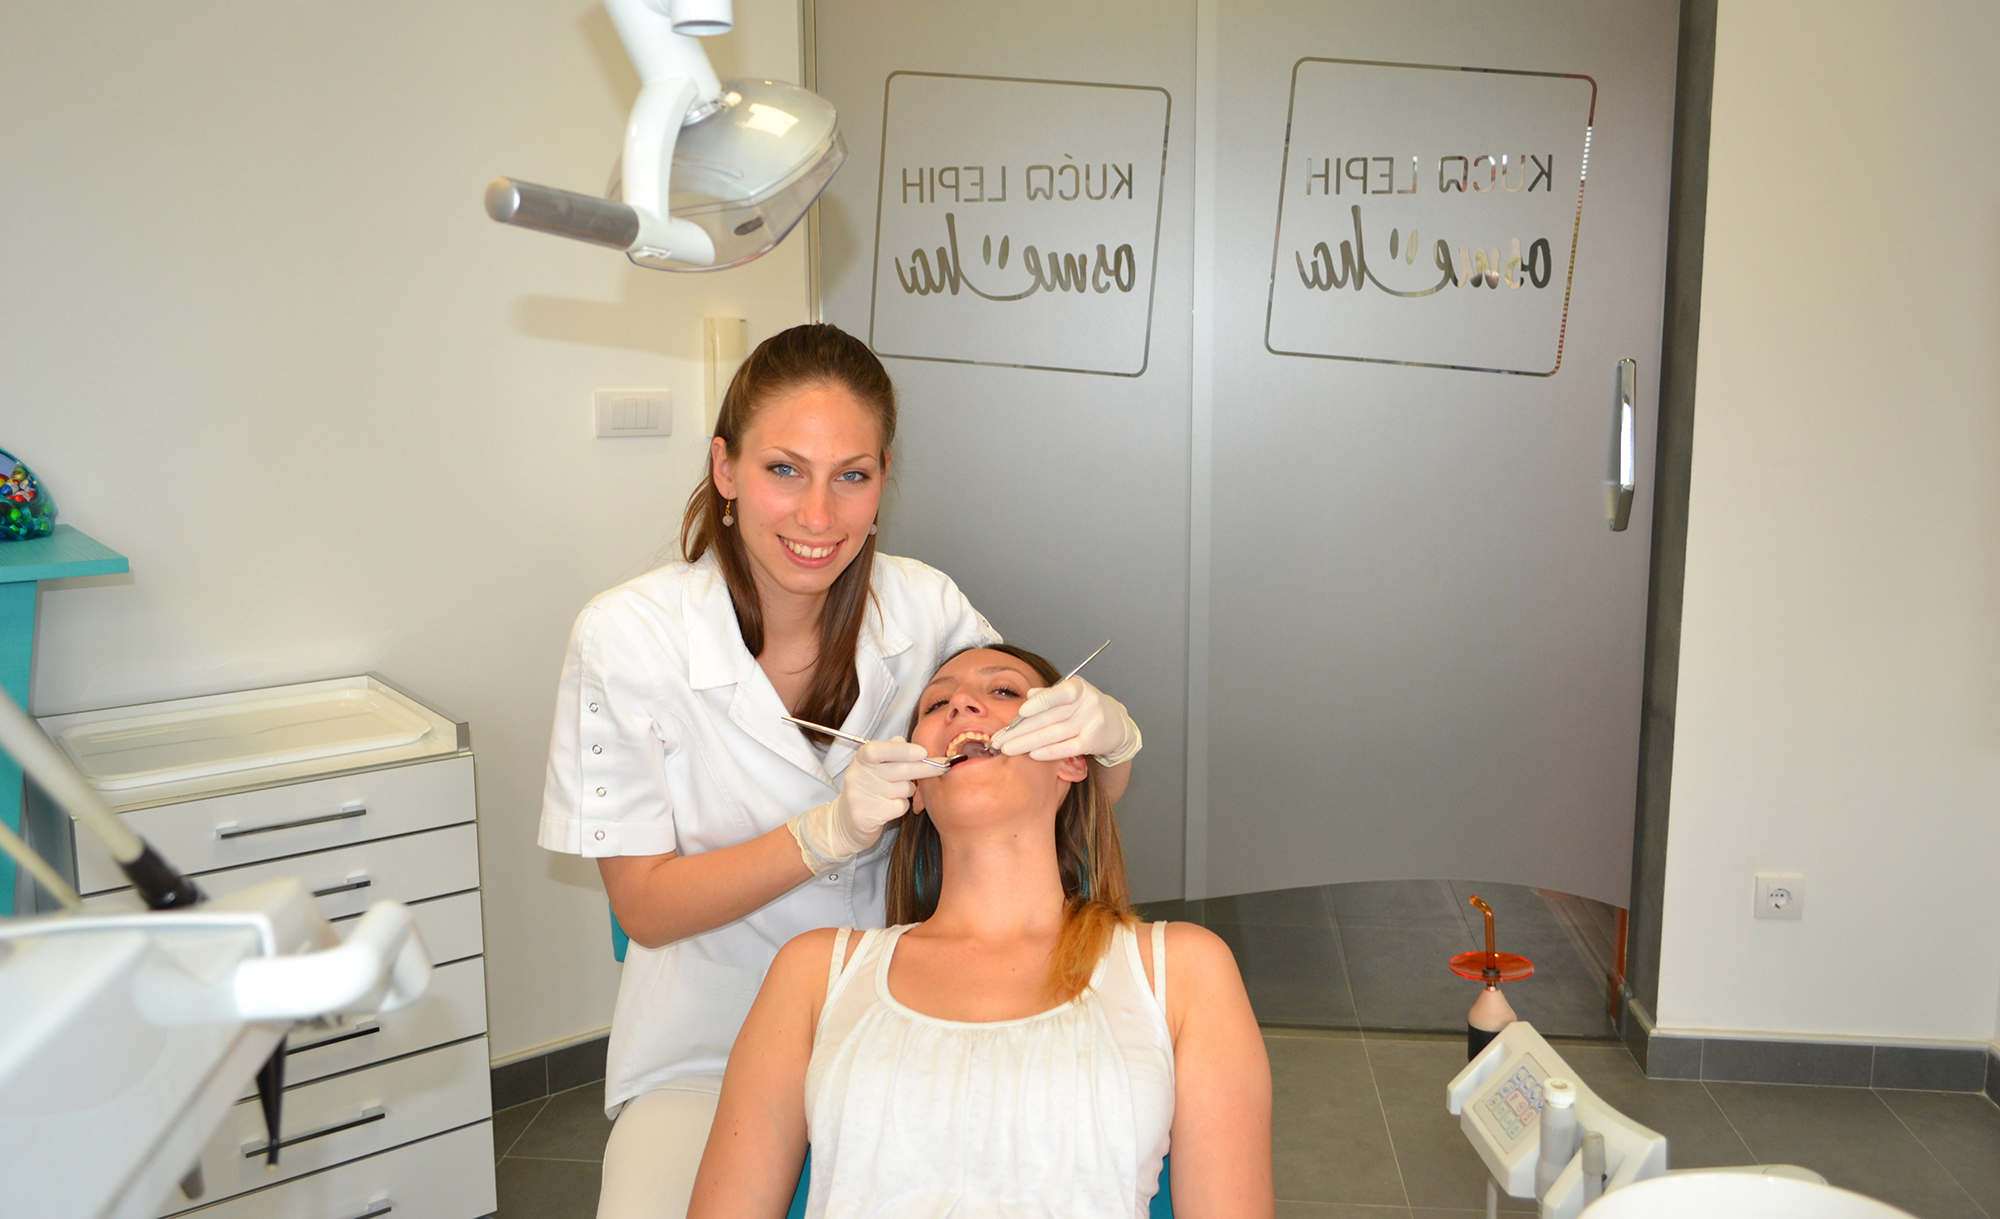 A photo of the dentist Tamara Mimic with a smiling patient